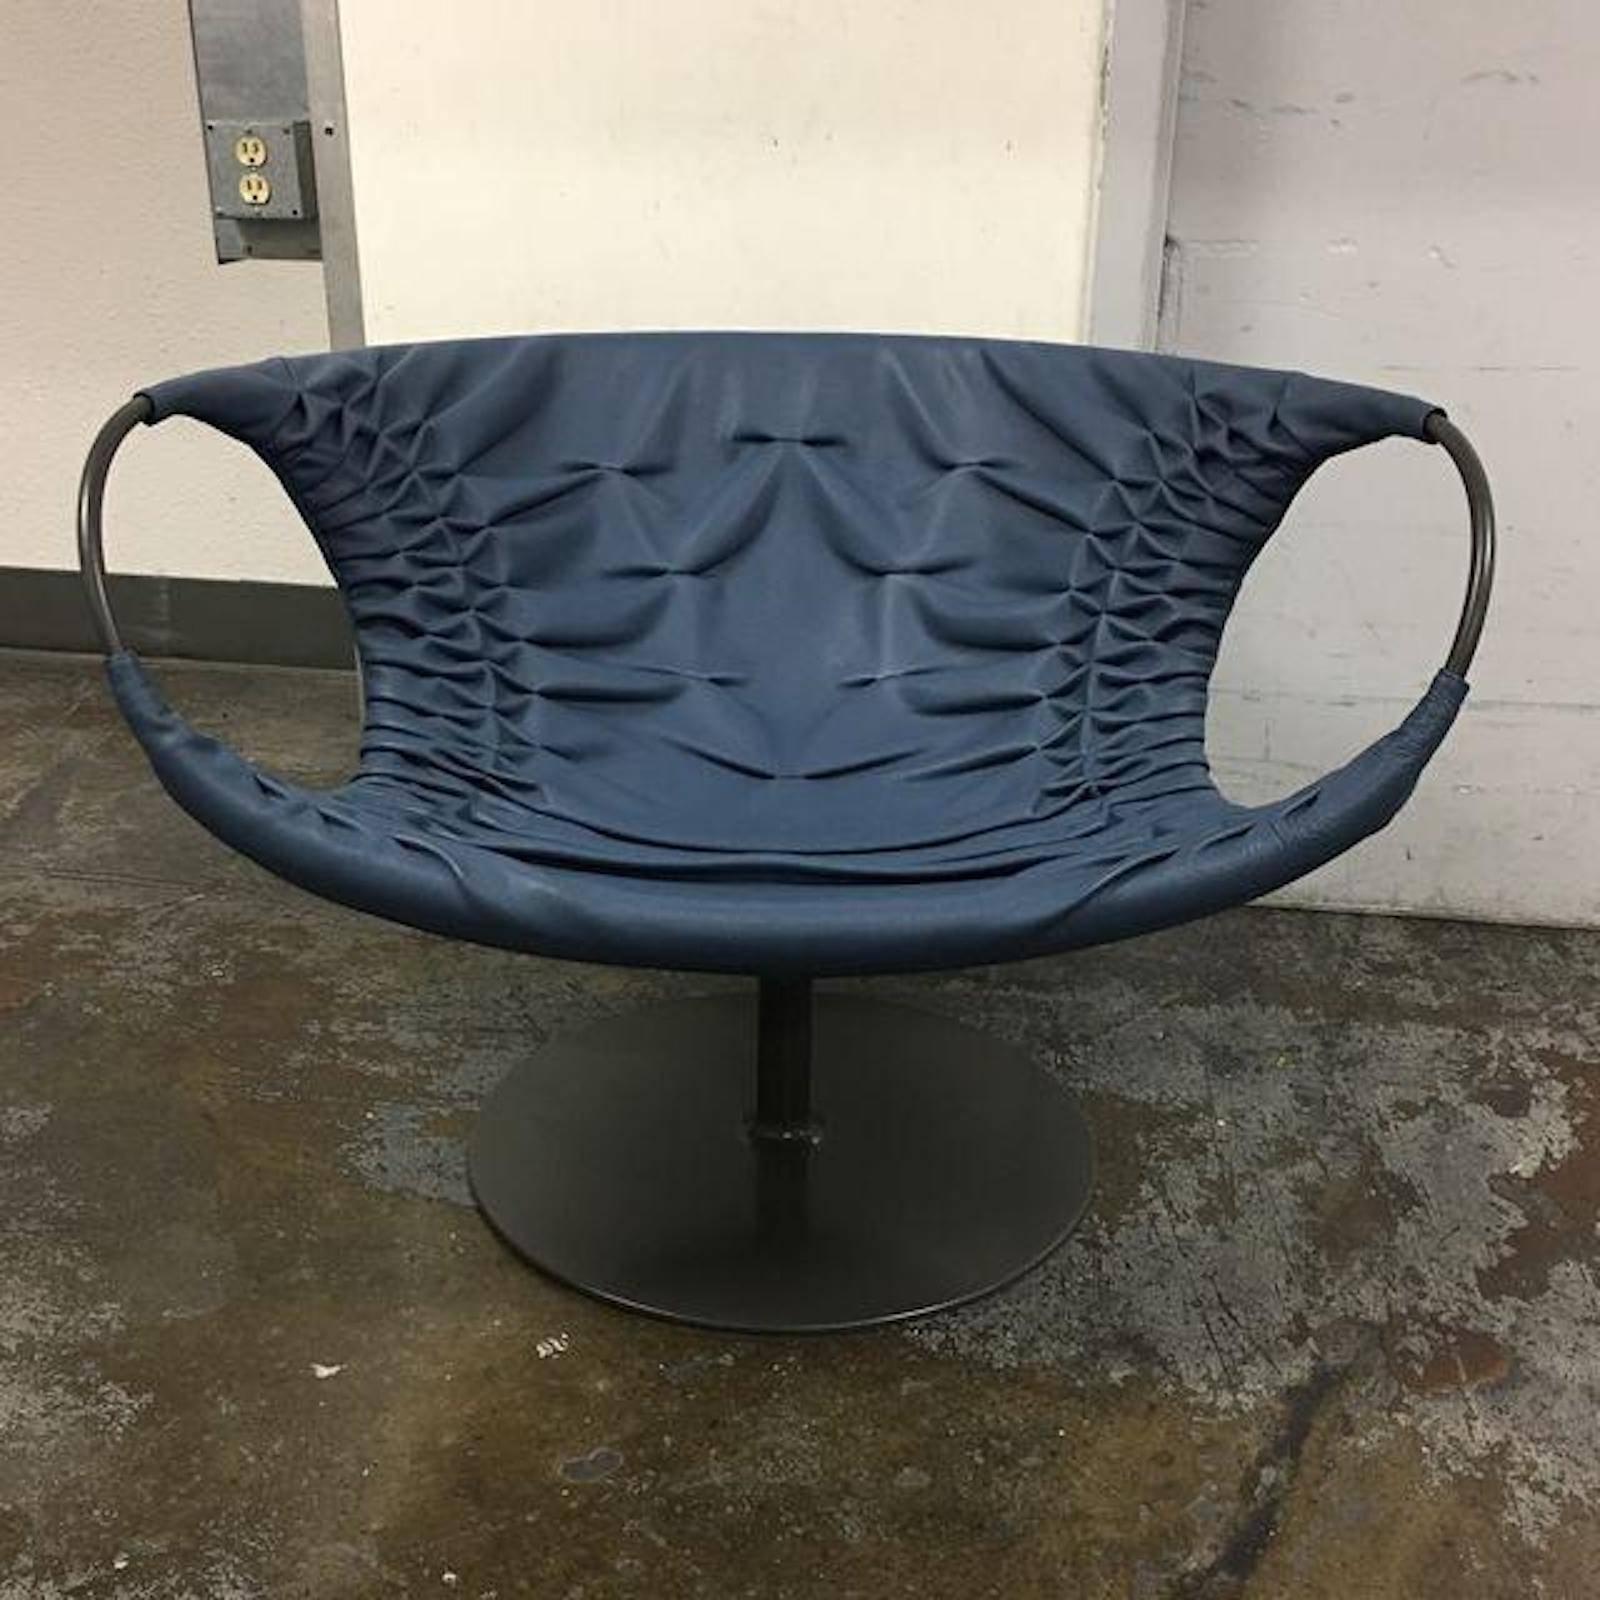 Design Plus Gallery has a Smock Leather swivel chair designed by Patricia Urquiola for Moroso. The frame which includes the round base plate has been rendered in metal which has been powder coated in a deep gray color. The seat and back are